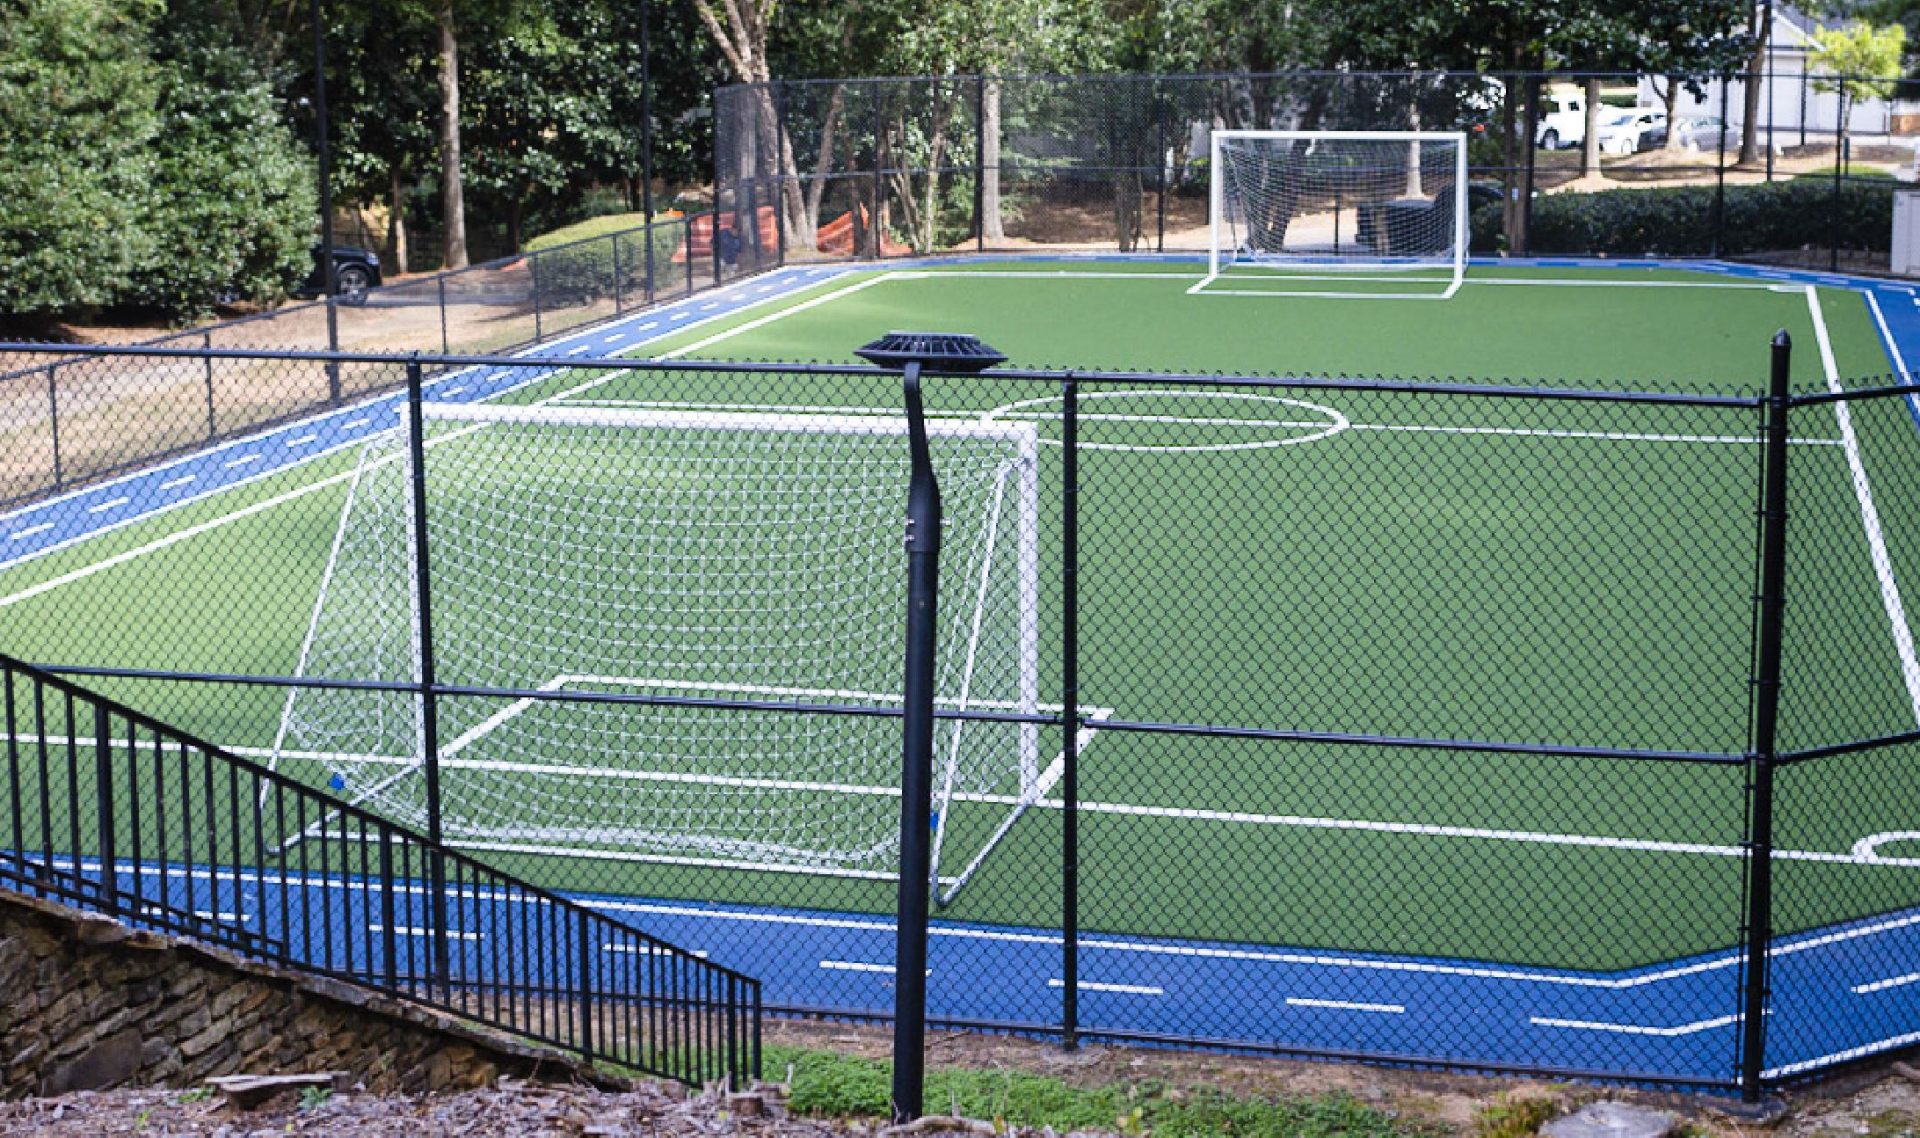 Fenced turf soccer field with track.